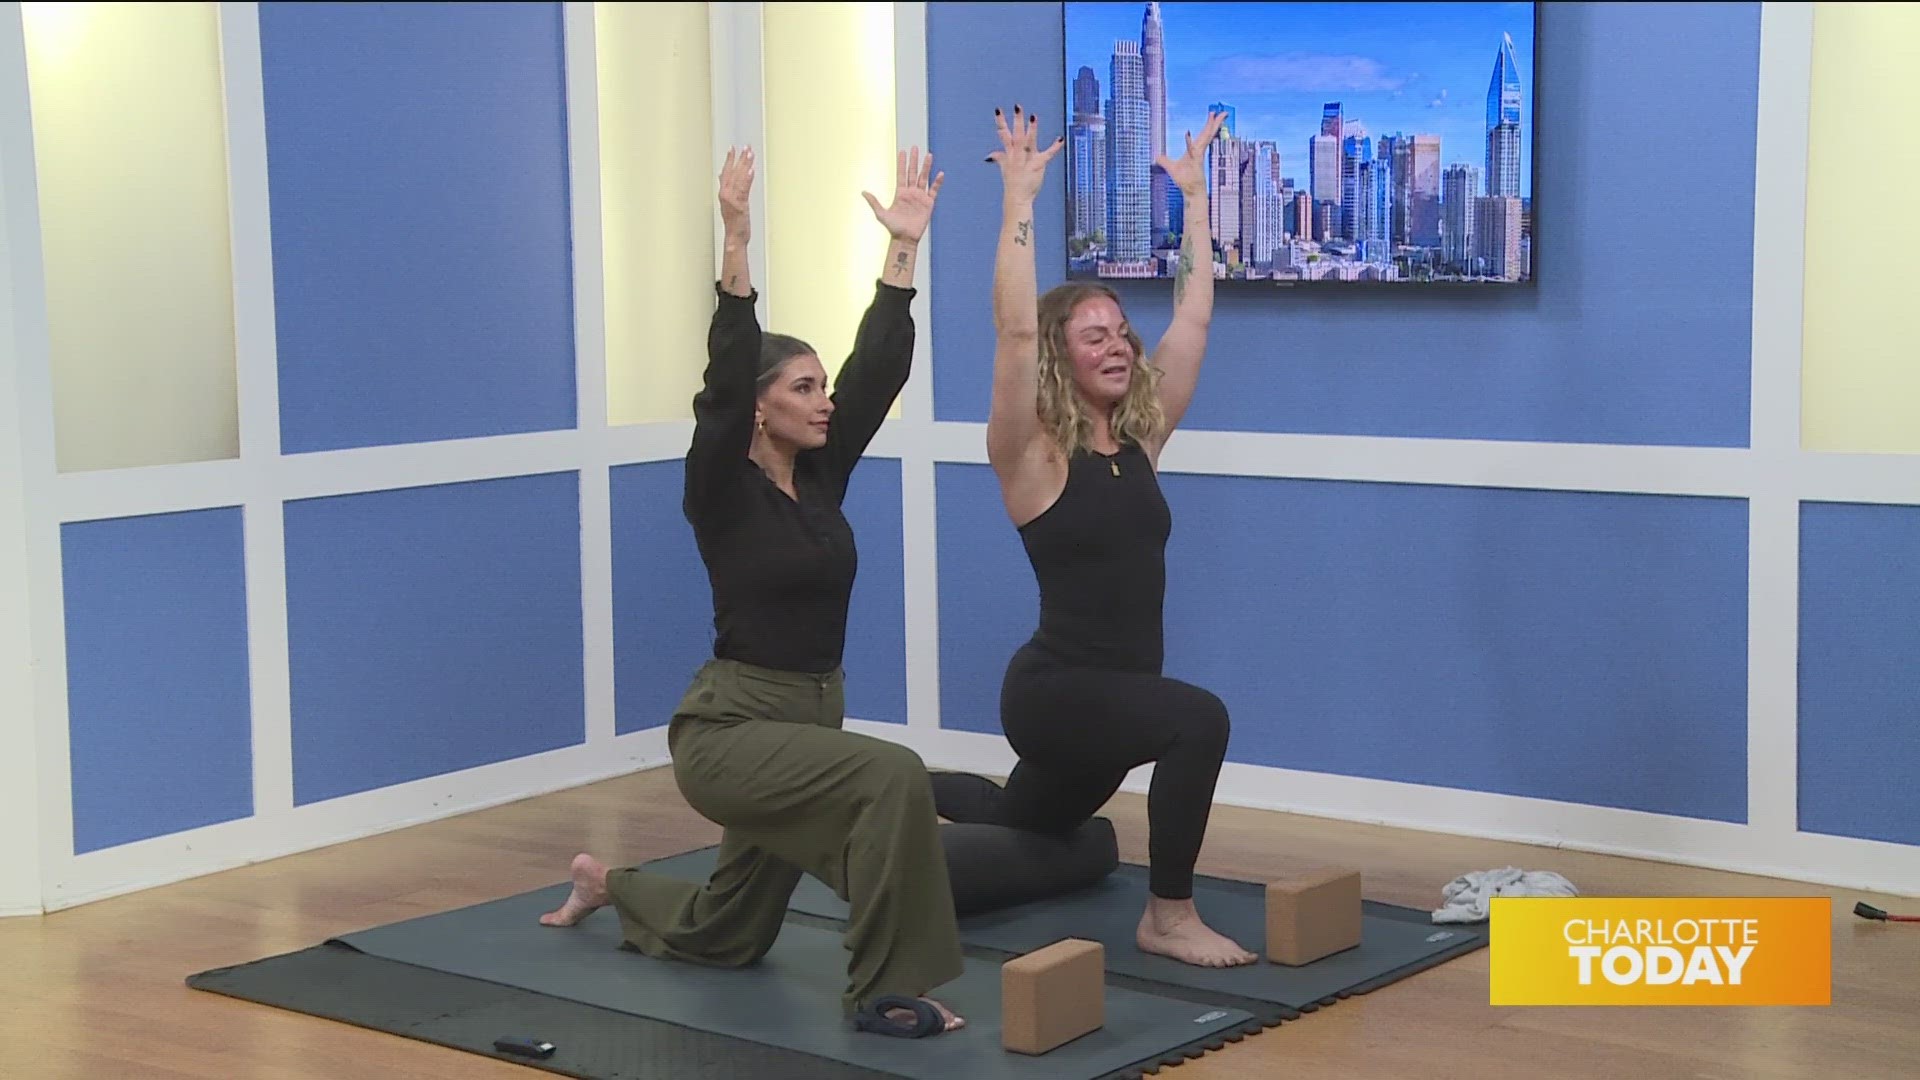 Coterie Wellness Studio offers beginner classes for those looking to start practicing yoga